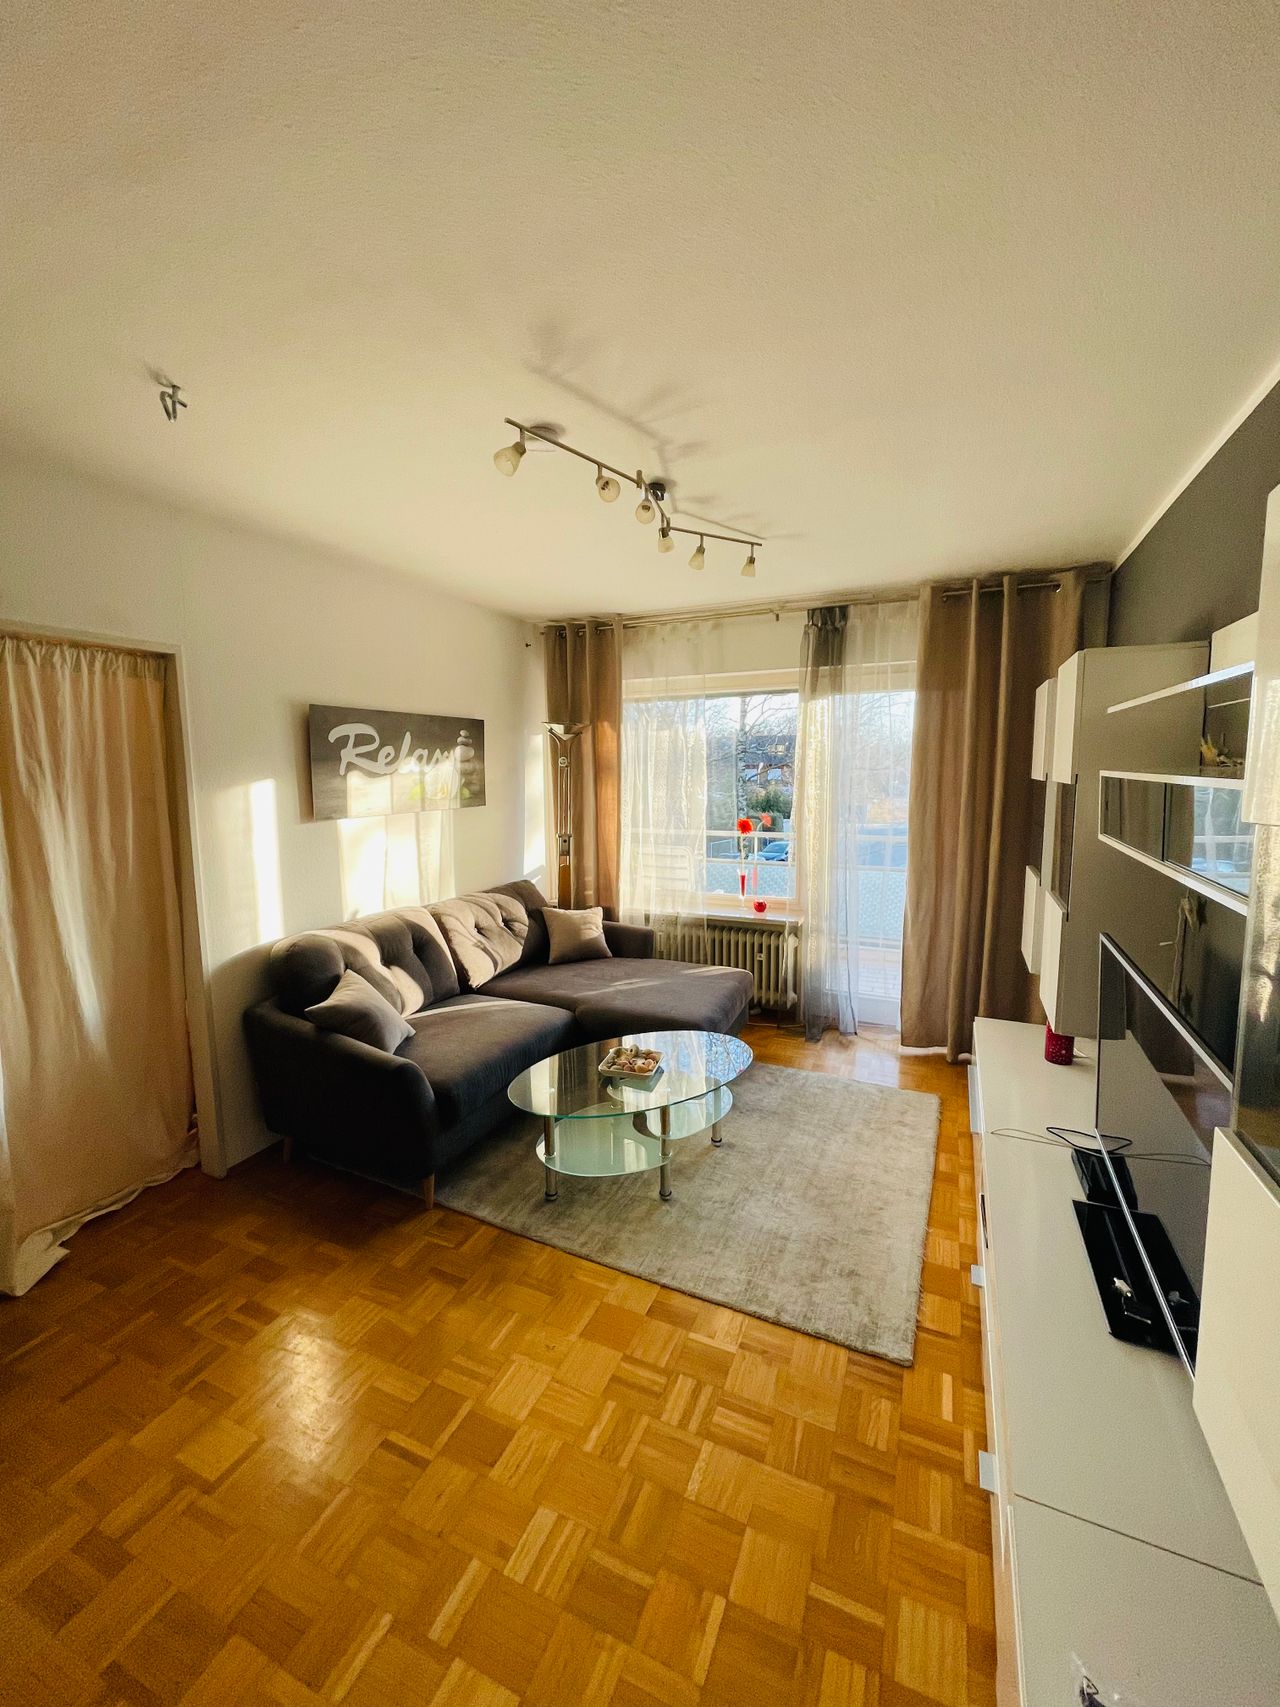 Renovated and well-kept 1.5 room apartment with balcony in Trudering